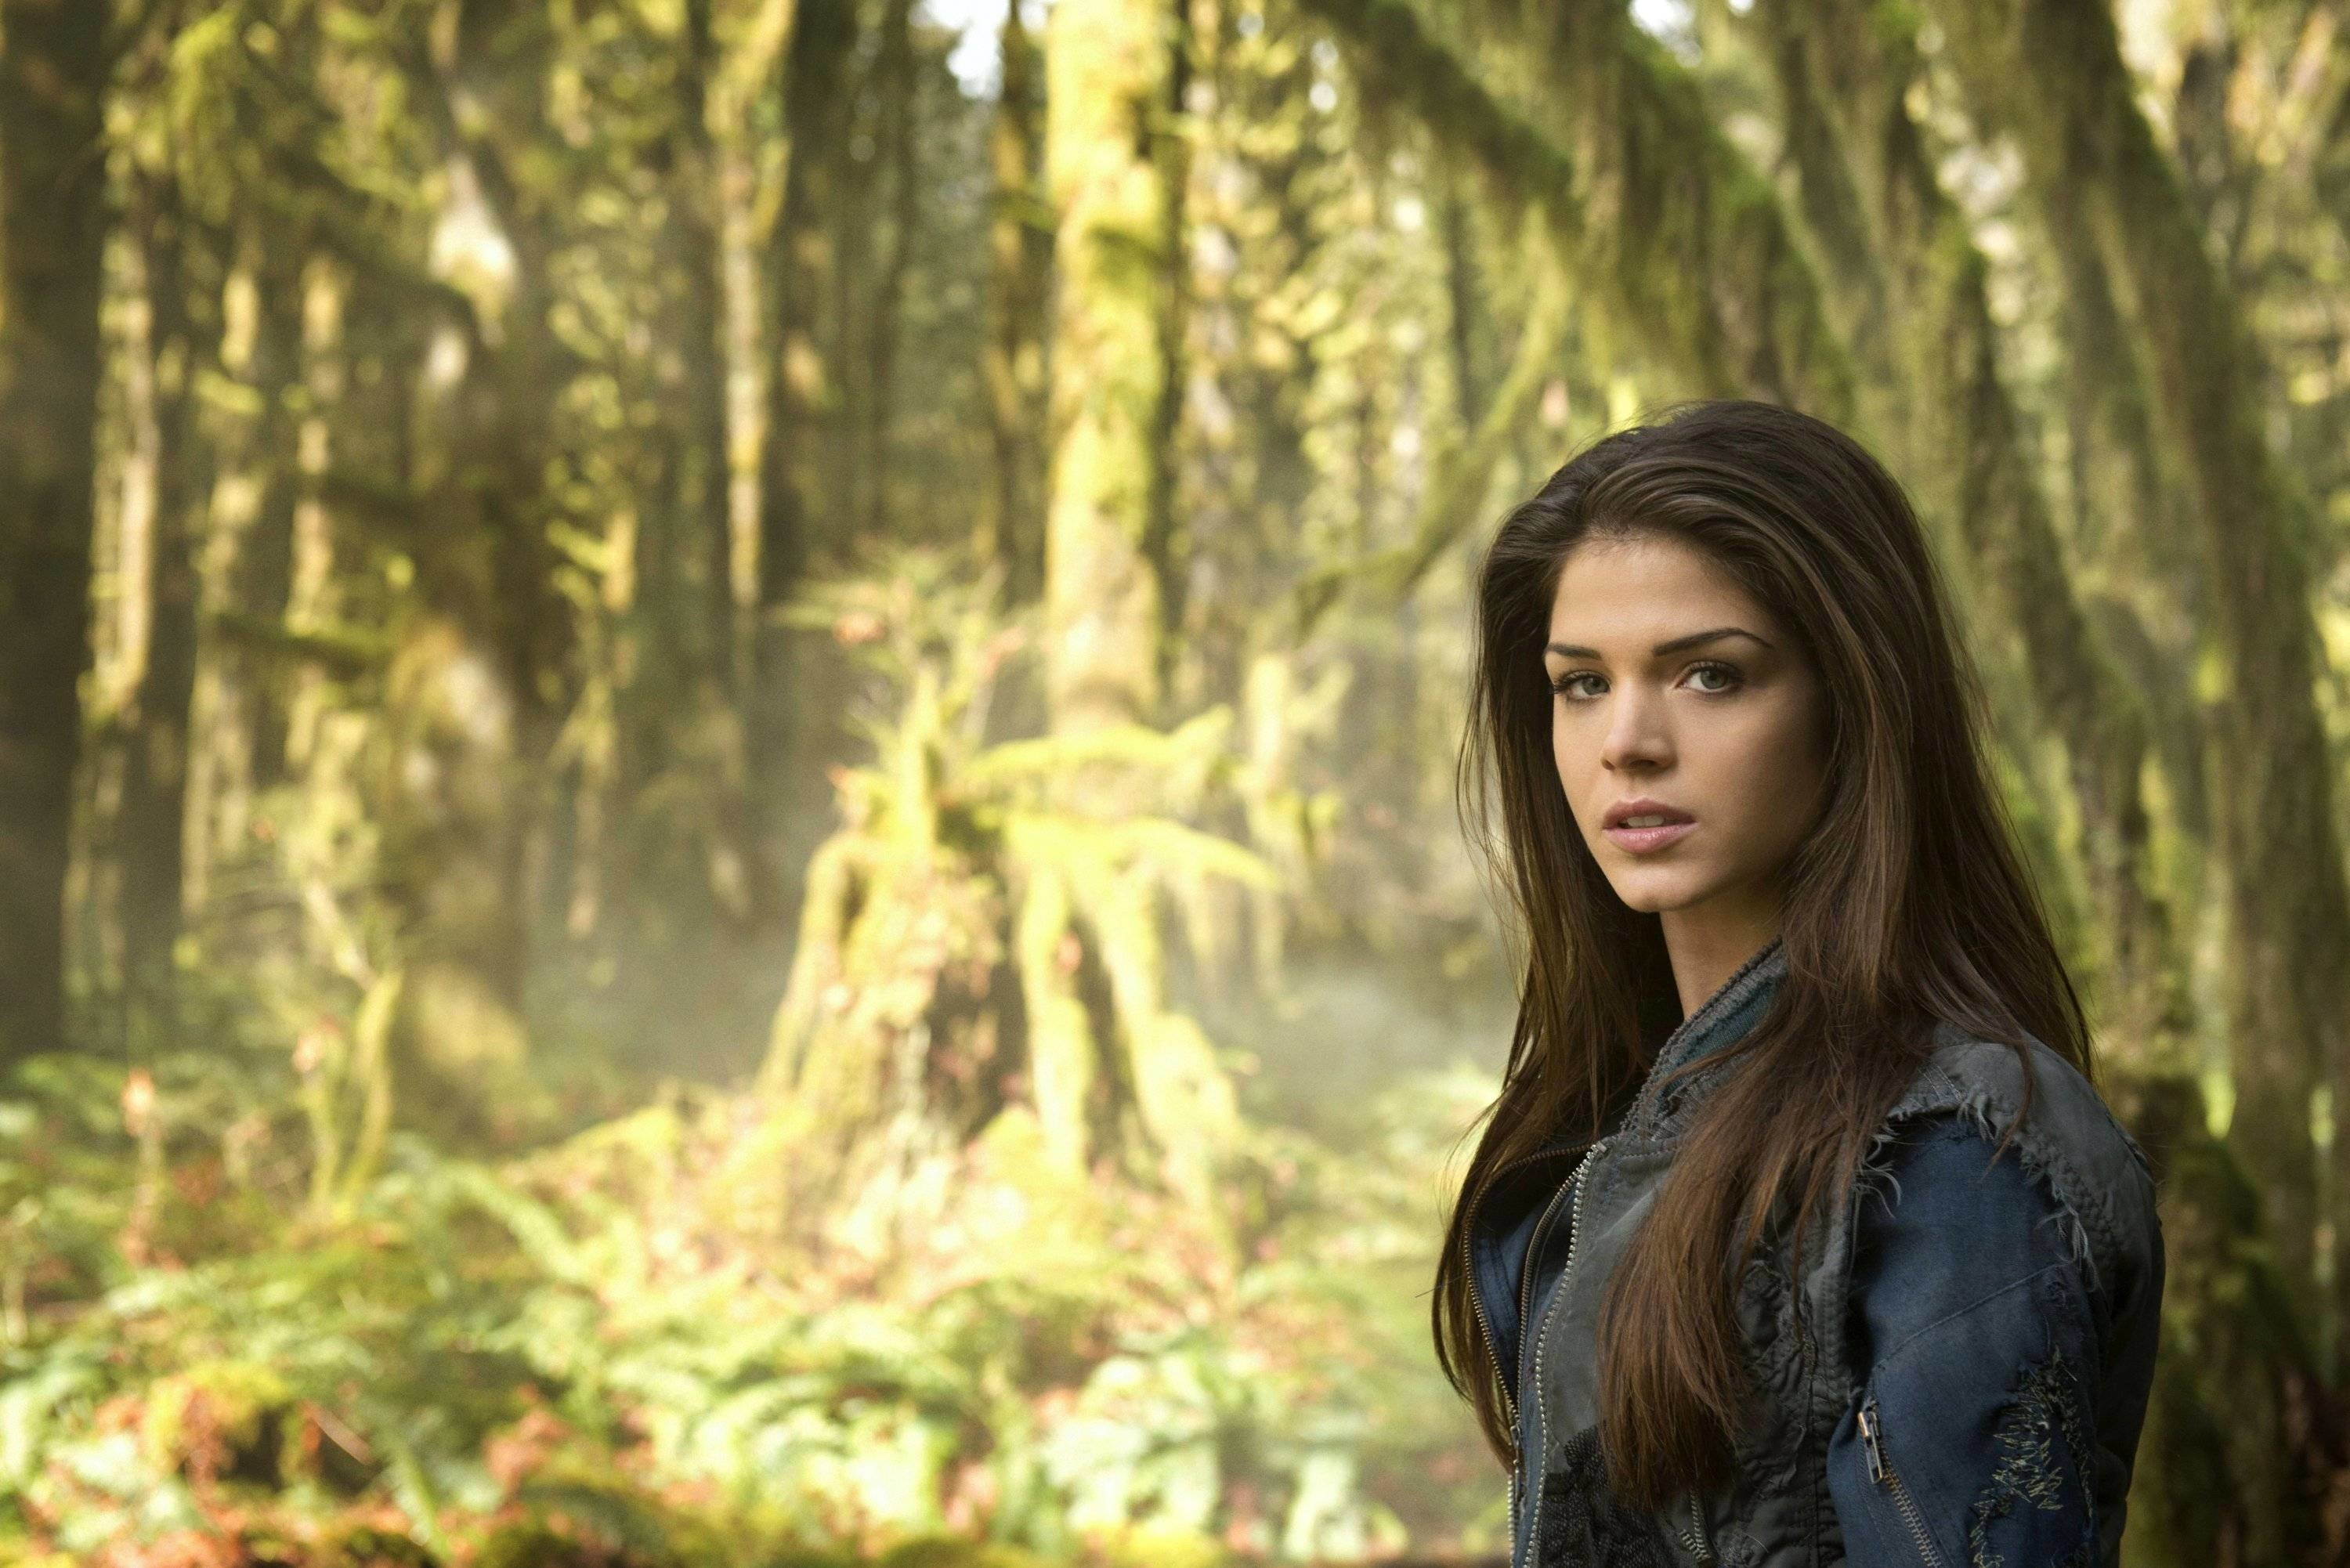 Marie Avgeropoulos As Octavia Blake In The 100, forest, tree